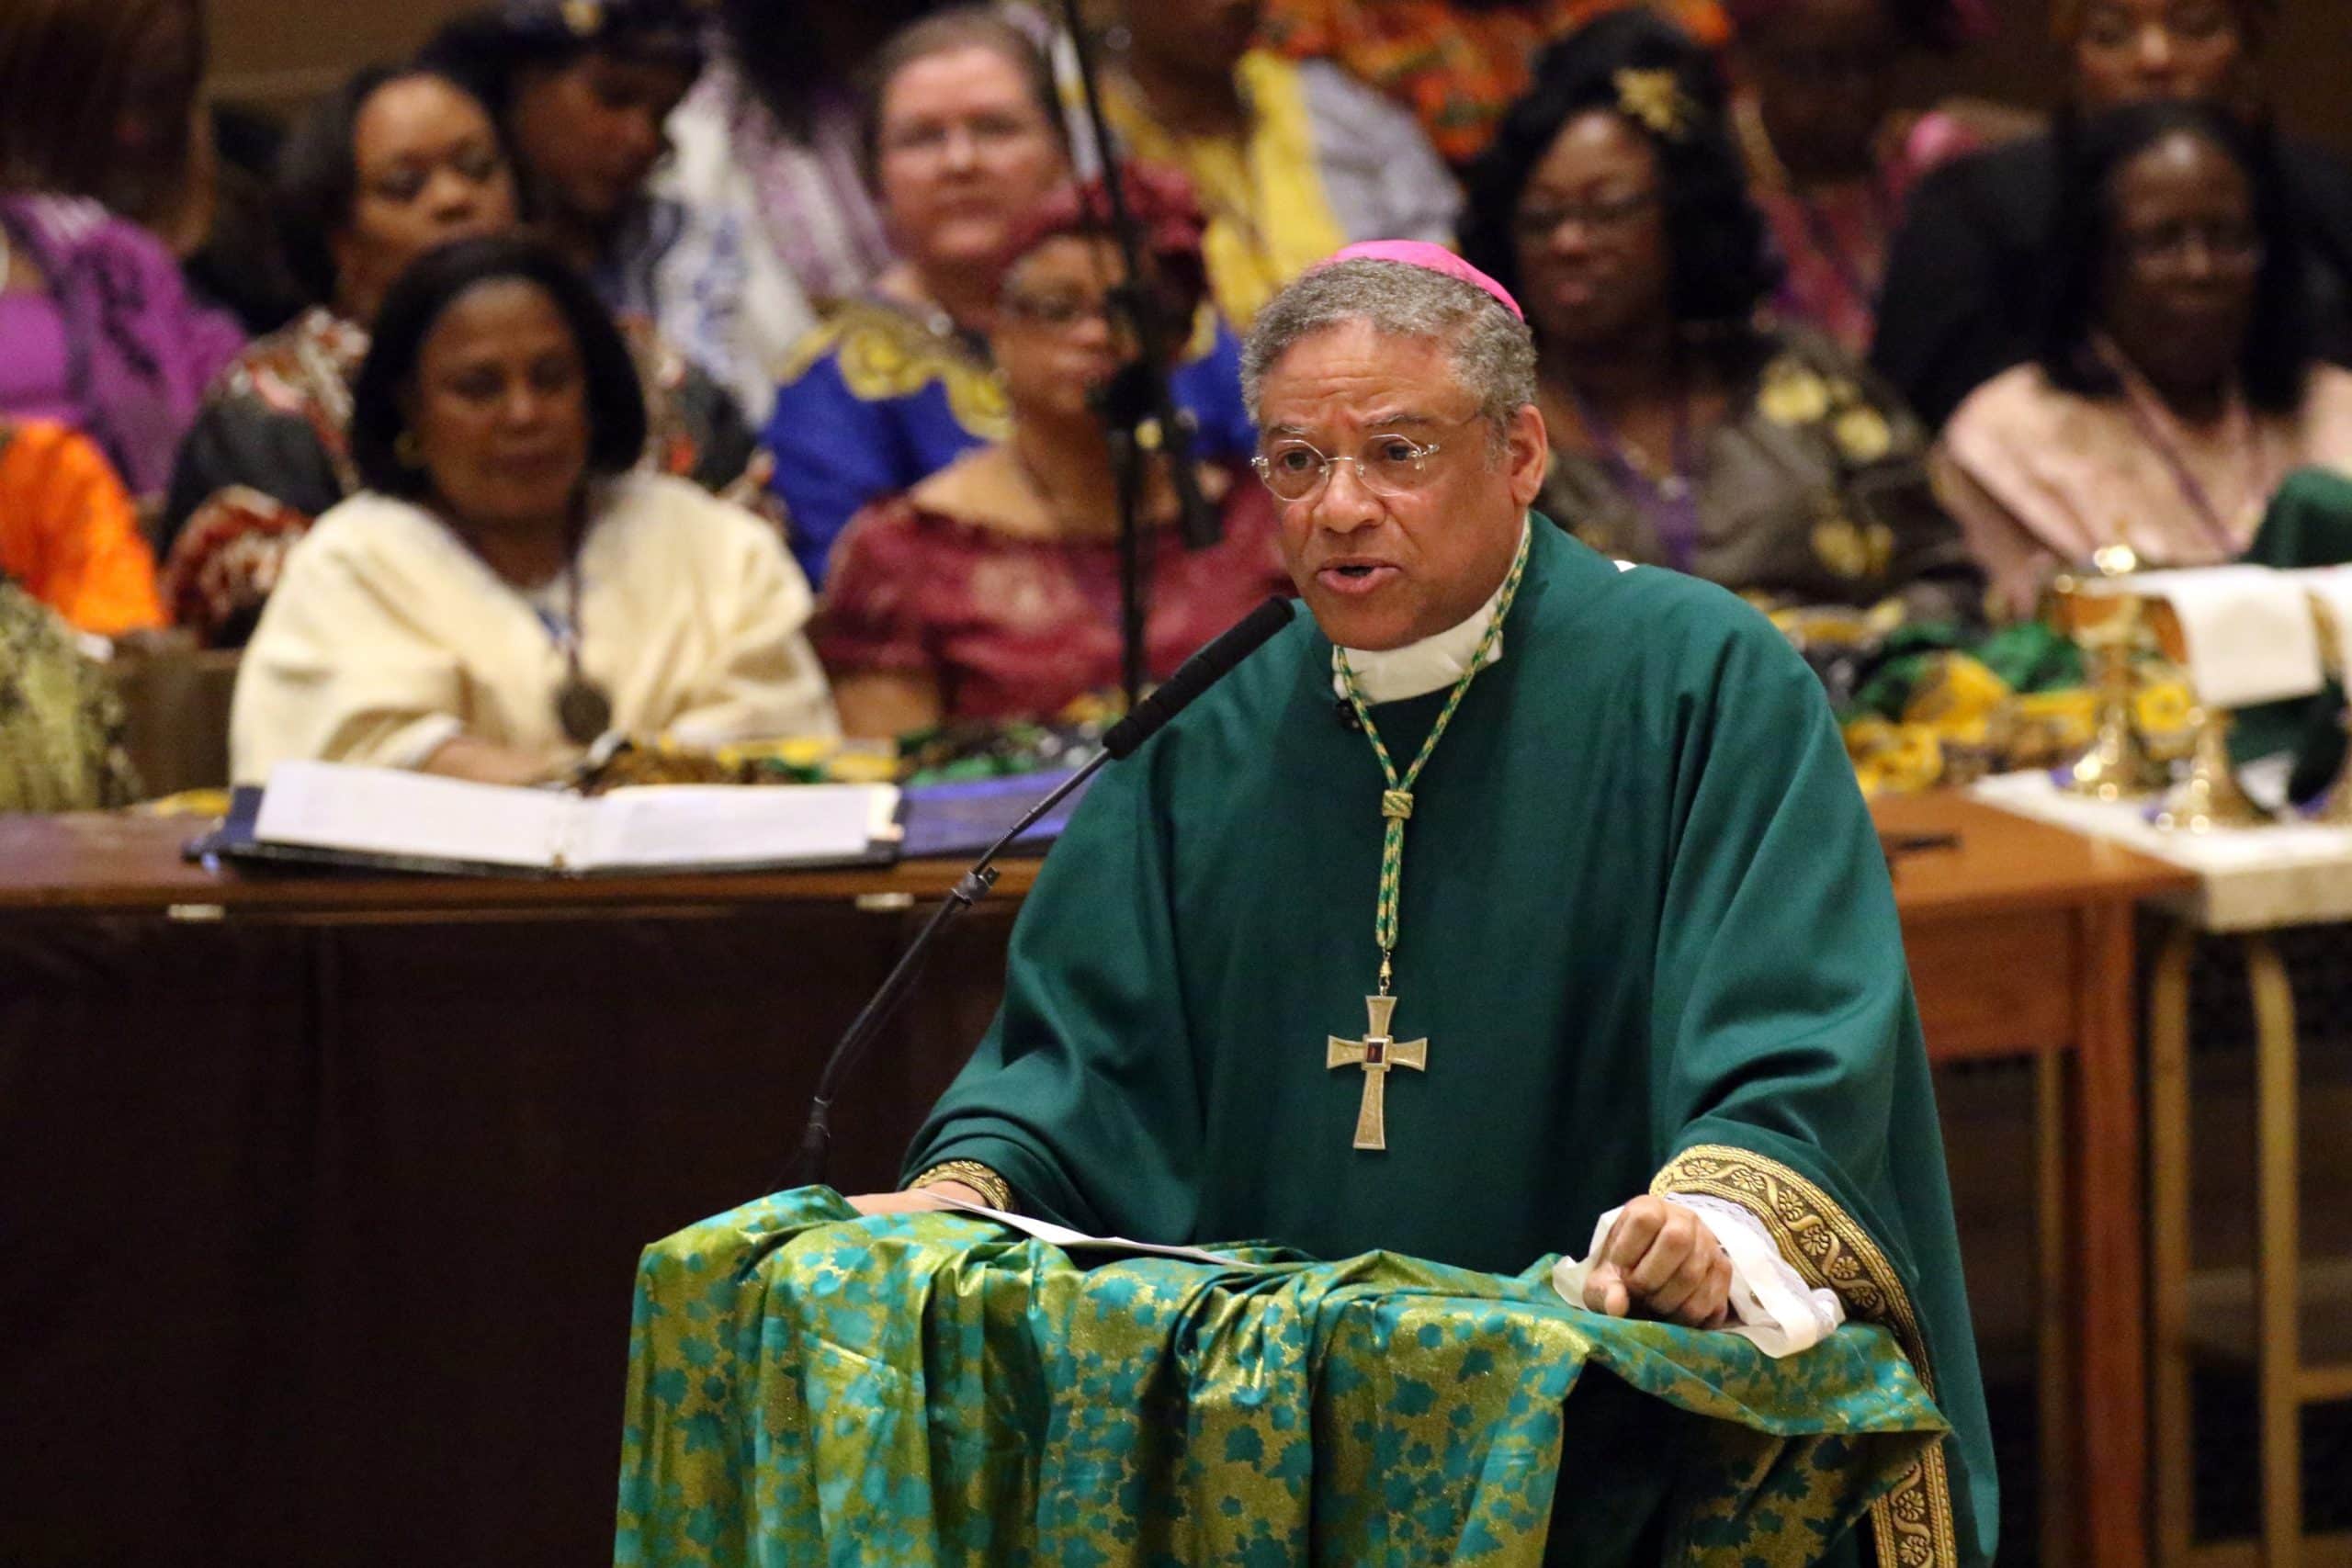 Chicago Auxiliary Bishop Joseph N. Perry, pictured in a file photo, was named chairman of the U.S. Conference of Catholic Bishops' Ad Hoc Committee Against Racism May 10, 2023. Ahead of the U.S. bishops' meeting in Orlando, Fla., June 14-16, Bishop Perry recently spoke with OSV News about his new role. (CNS photo/Gregory A. Shemitz)